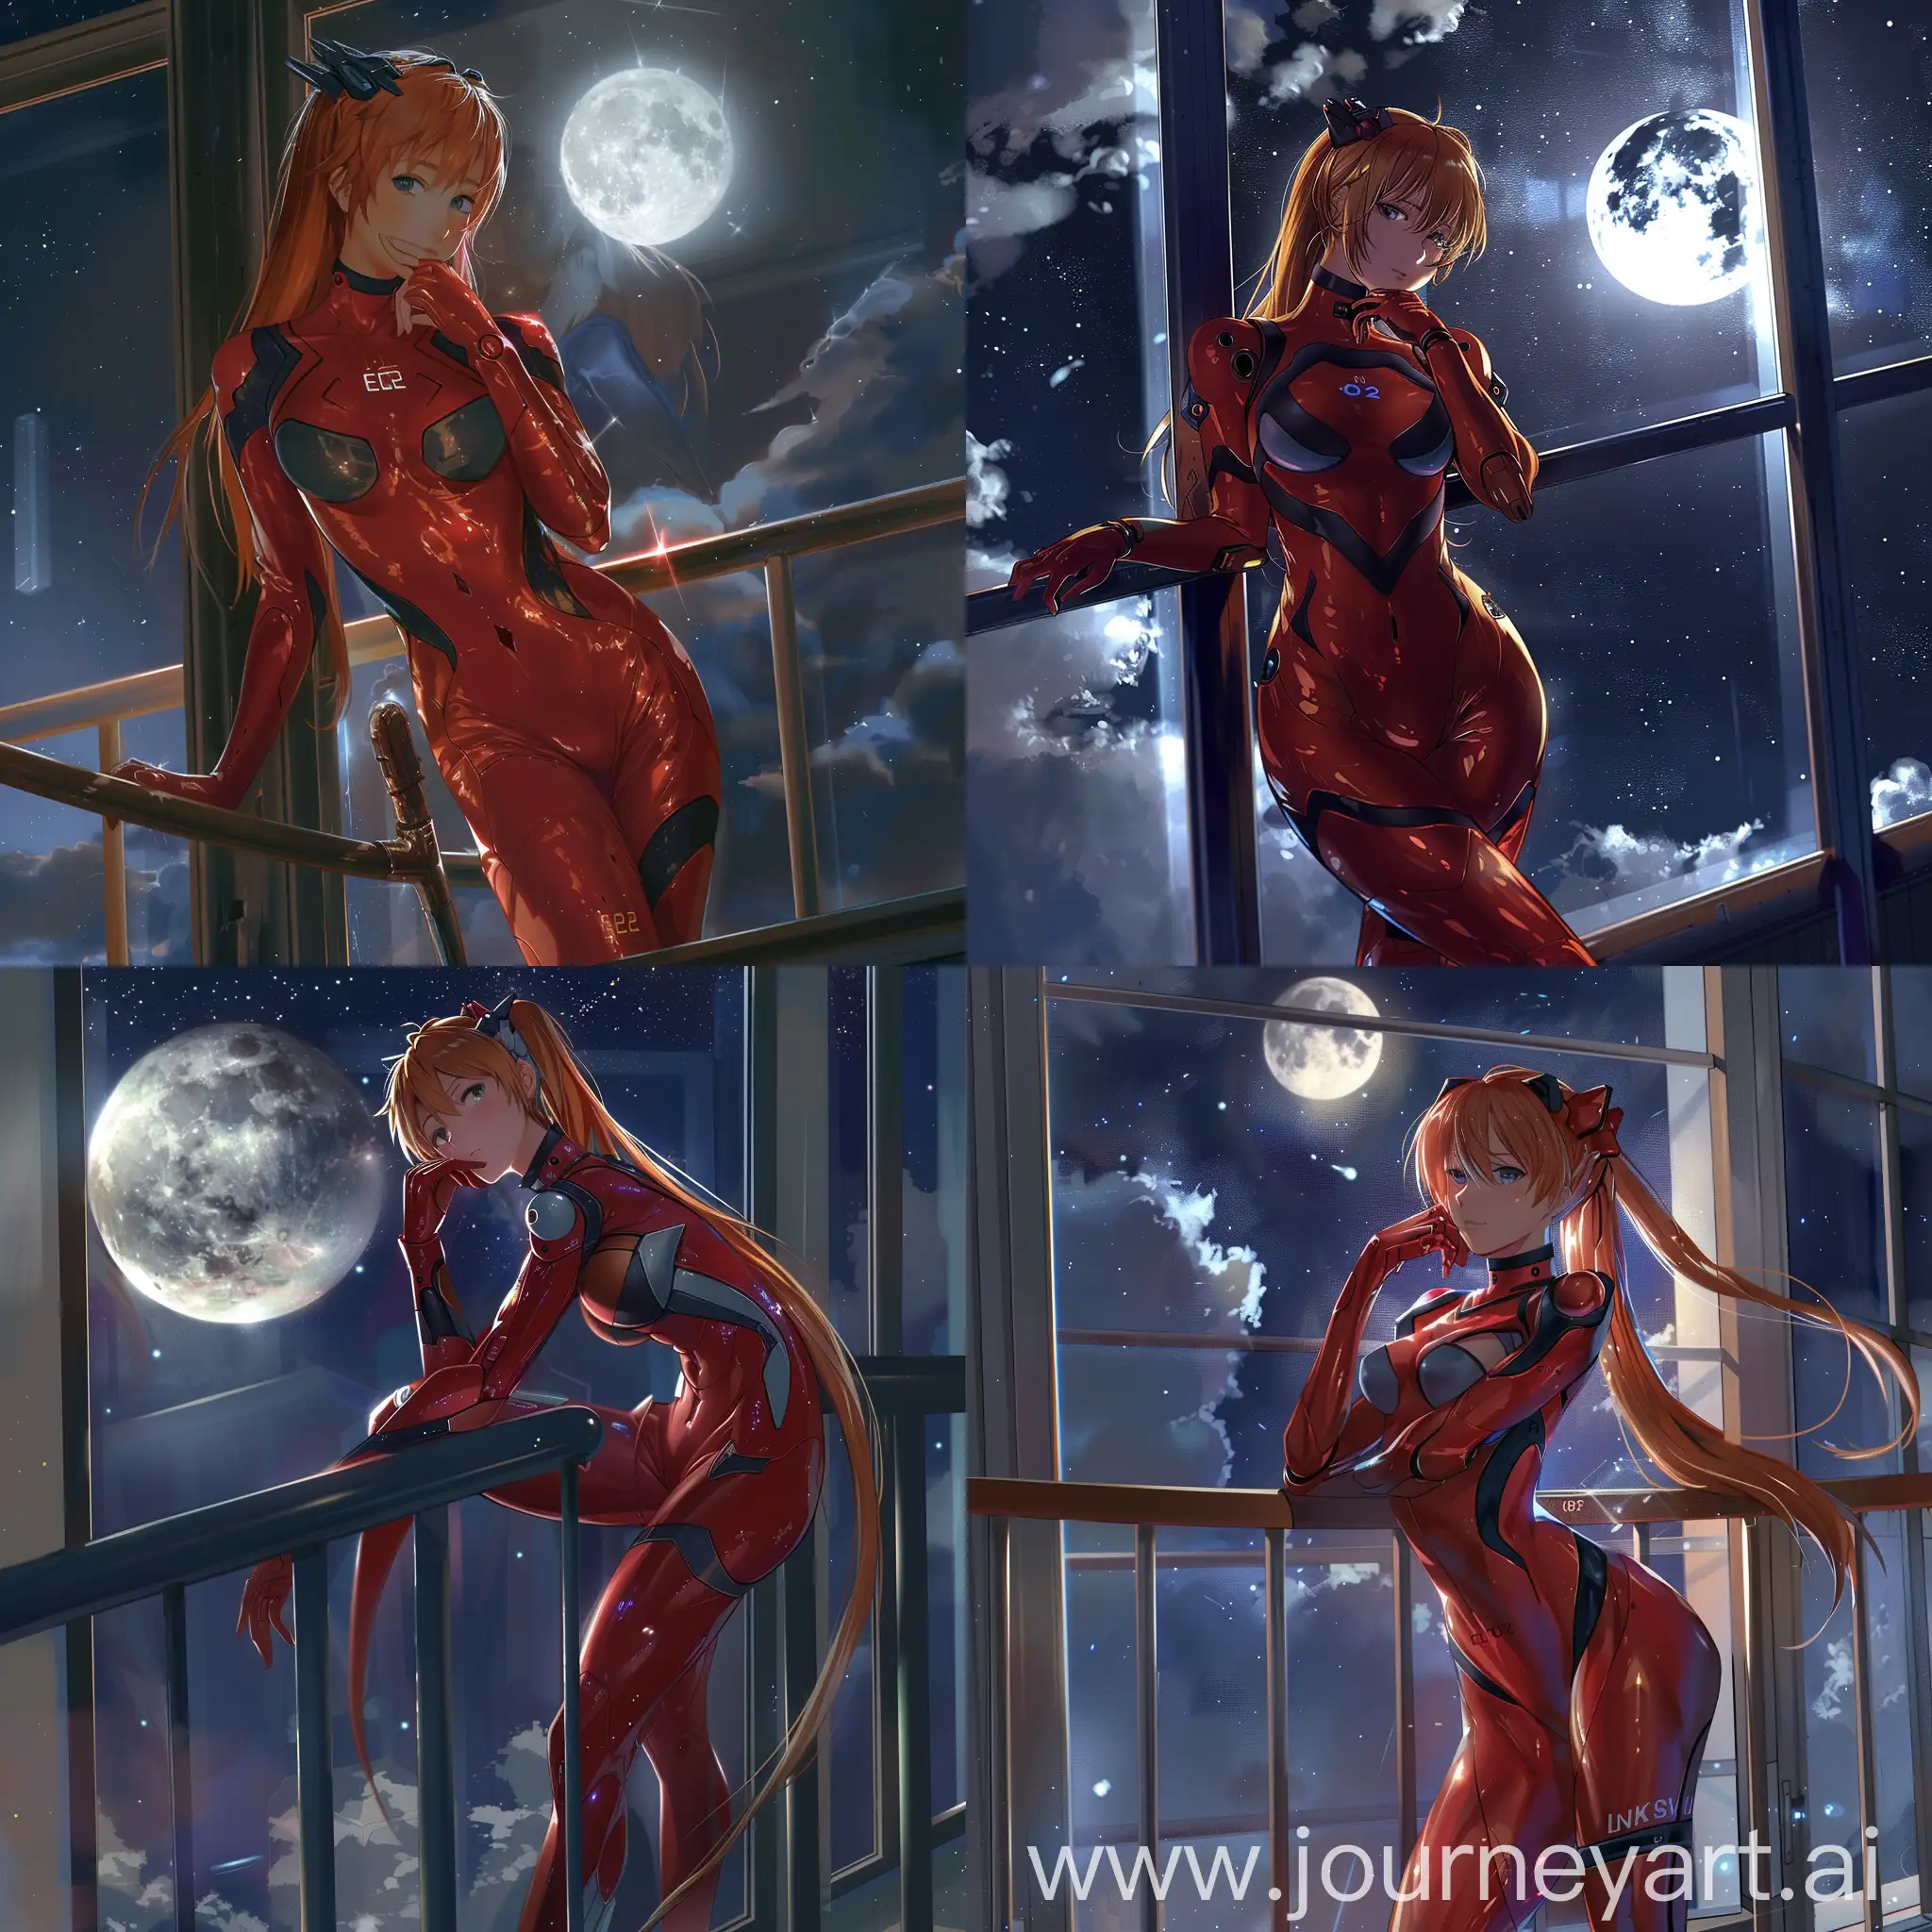 Asuka Langley Soryu from the popular series Neon Genesis Evangelion, standing elegantly on a windowsill at night, bathed in the soft silver glow of the moon. She leans casually against the railing, one hand supporting her chin in a thoughtful pose, while the other hand rests effortlessly on the railing beside her. The moonlight casts a gentle luminescence on her distinctive red EVA Unit-02 battle armor, highlighting its intricate details and reflecting off the windowpanes behind her. The backdrop is a starry night sky, with the moon partially obscured by wispy clouds, creating a serene yet mysterious atmosphere